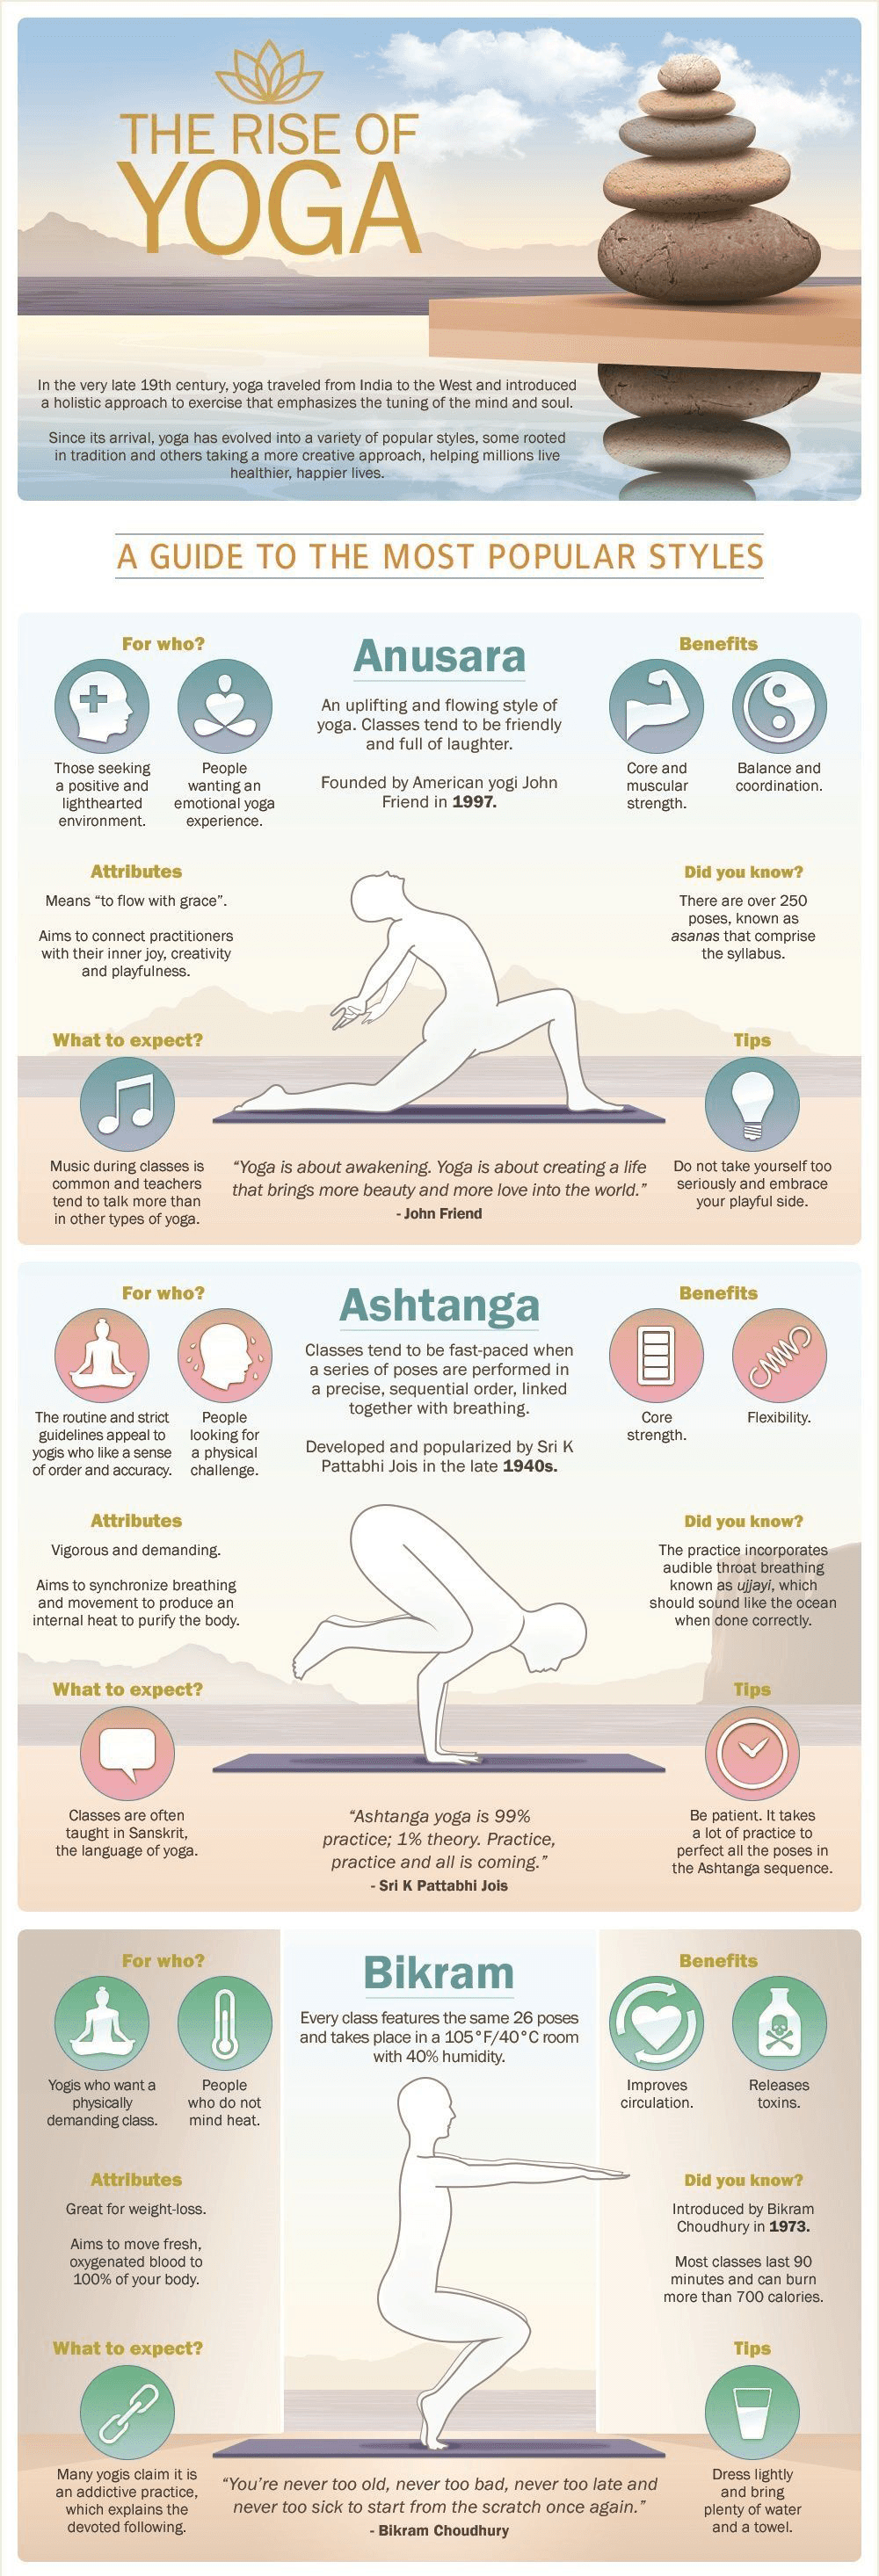 How Well Do You Know the 10 Top Yoga Styles?